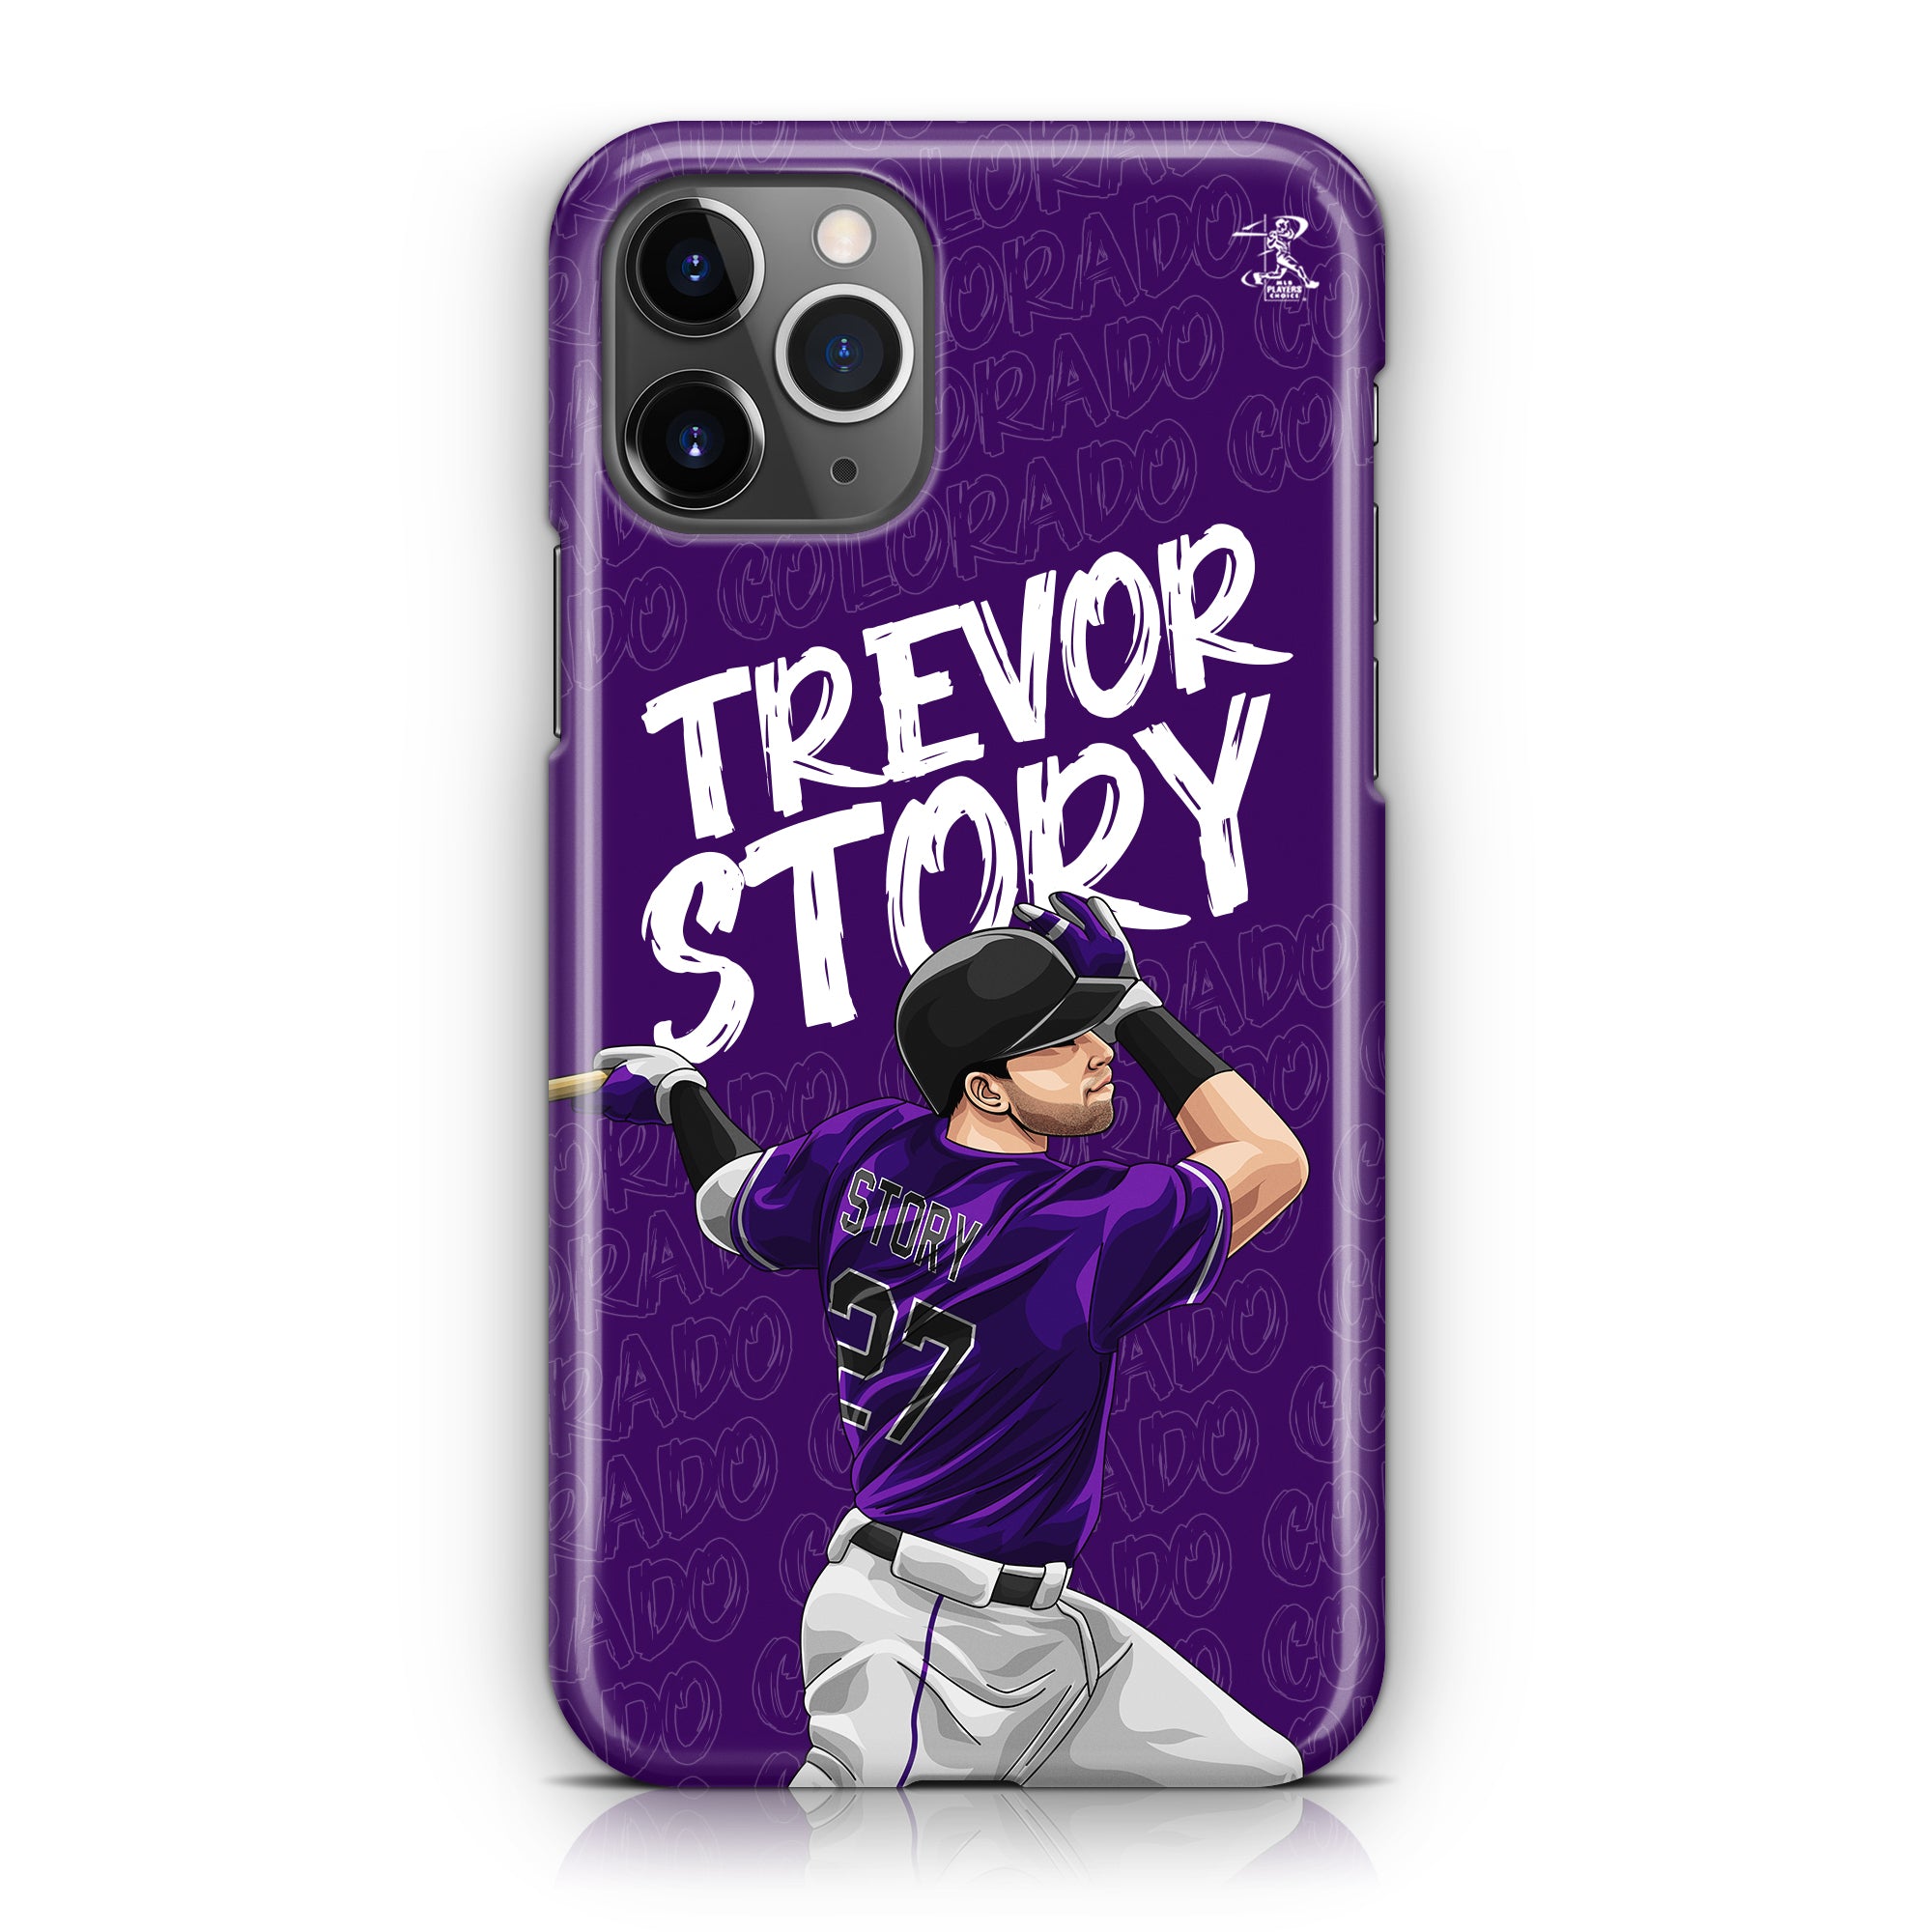 Story Star Series 2.0 Case